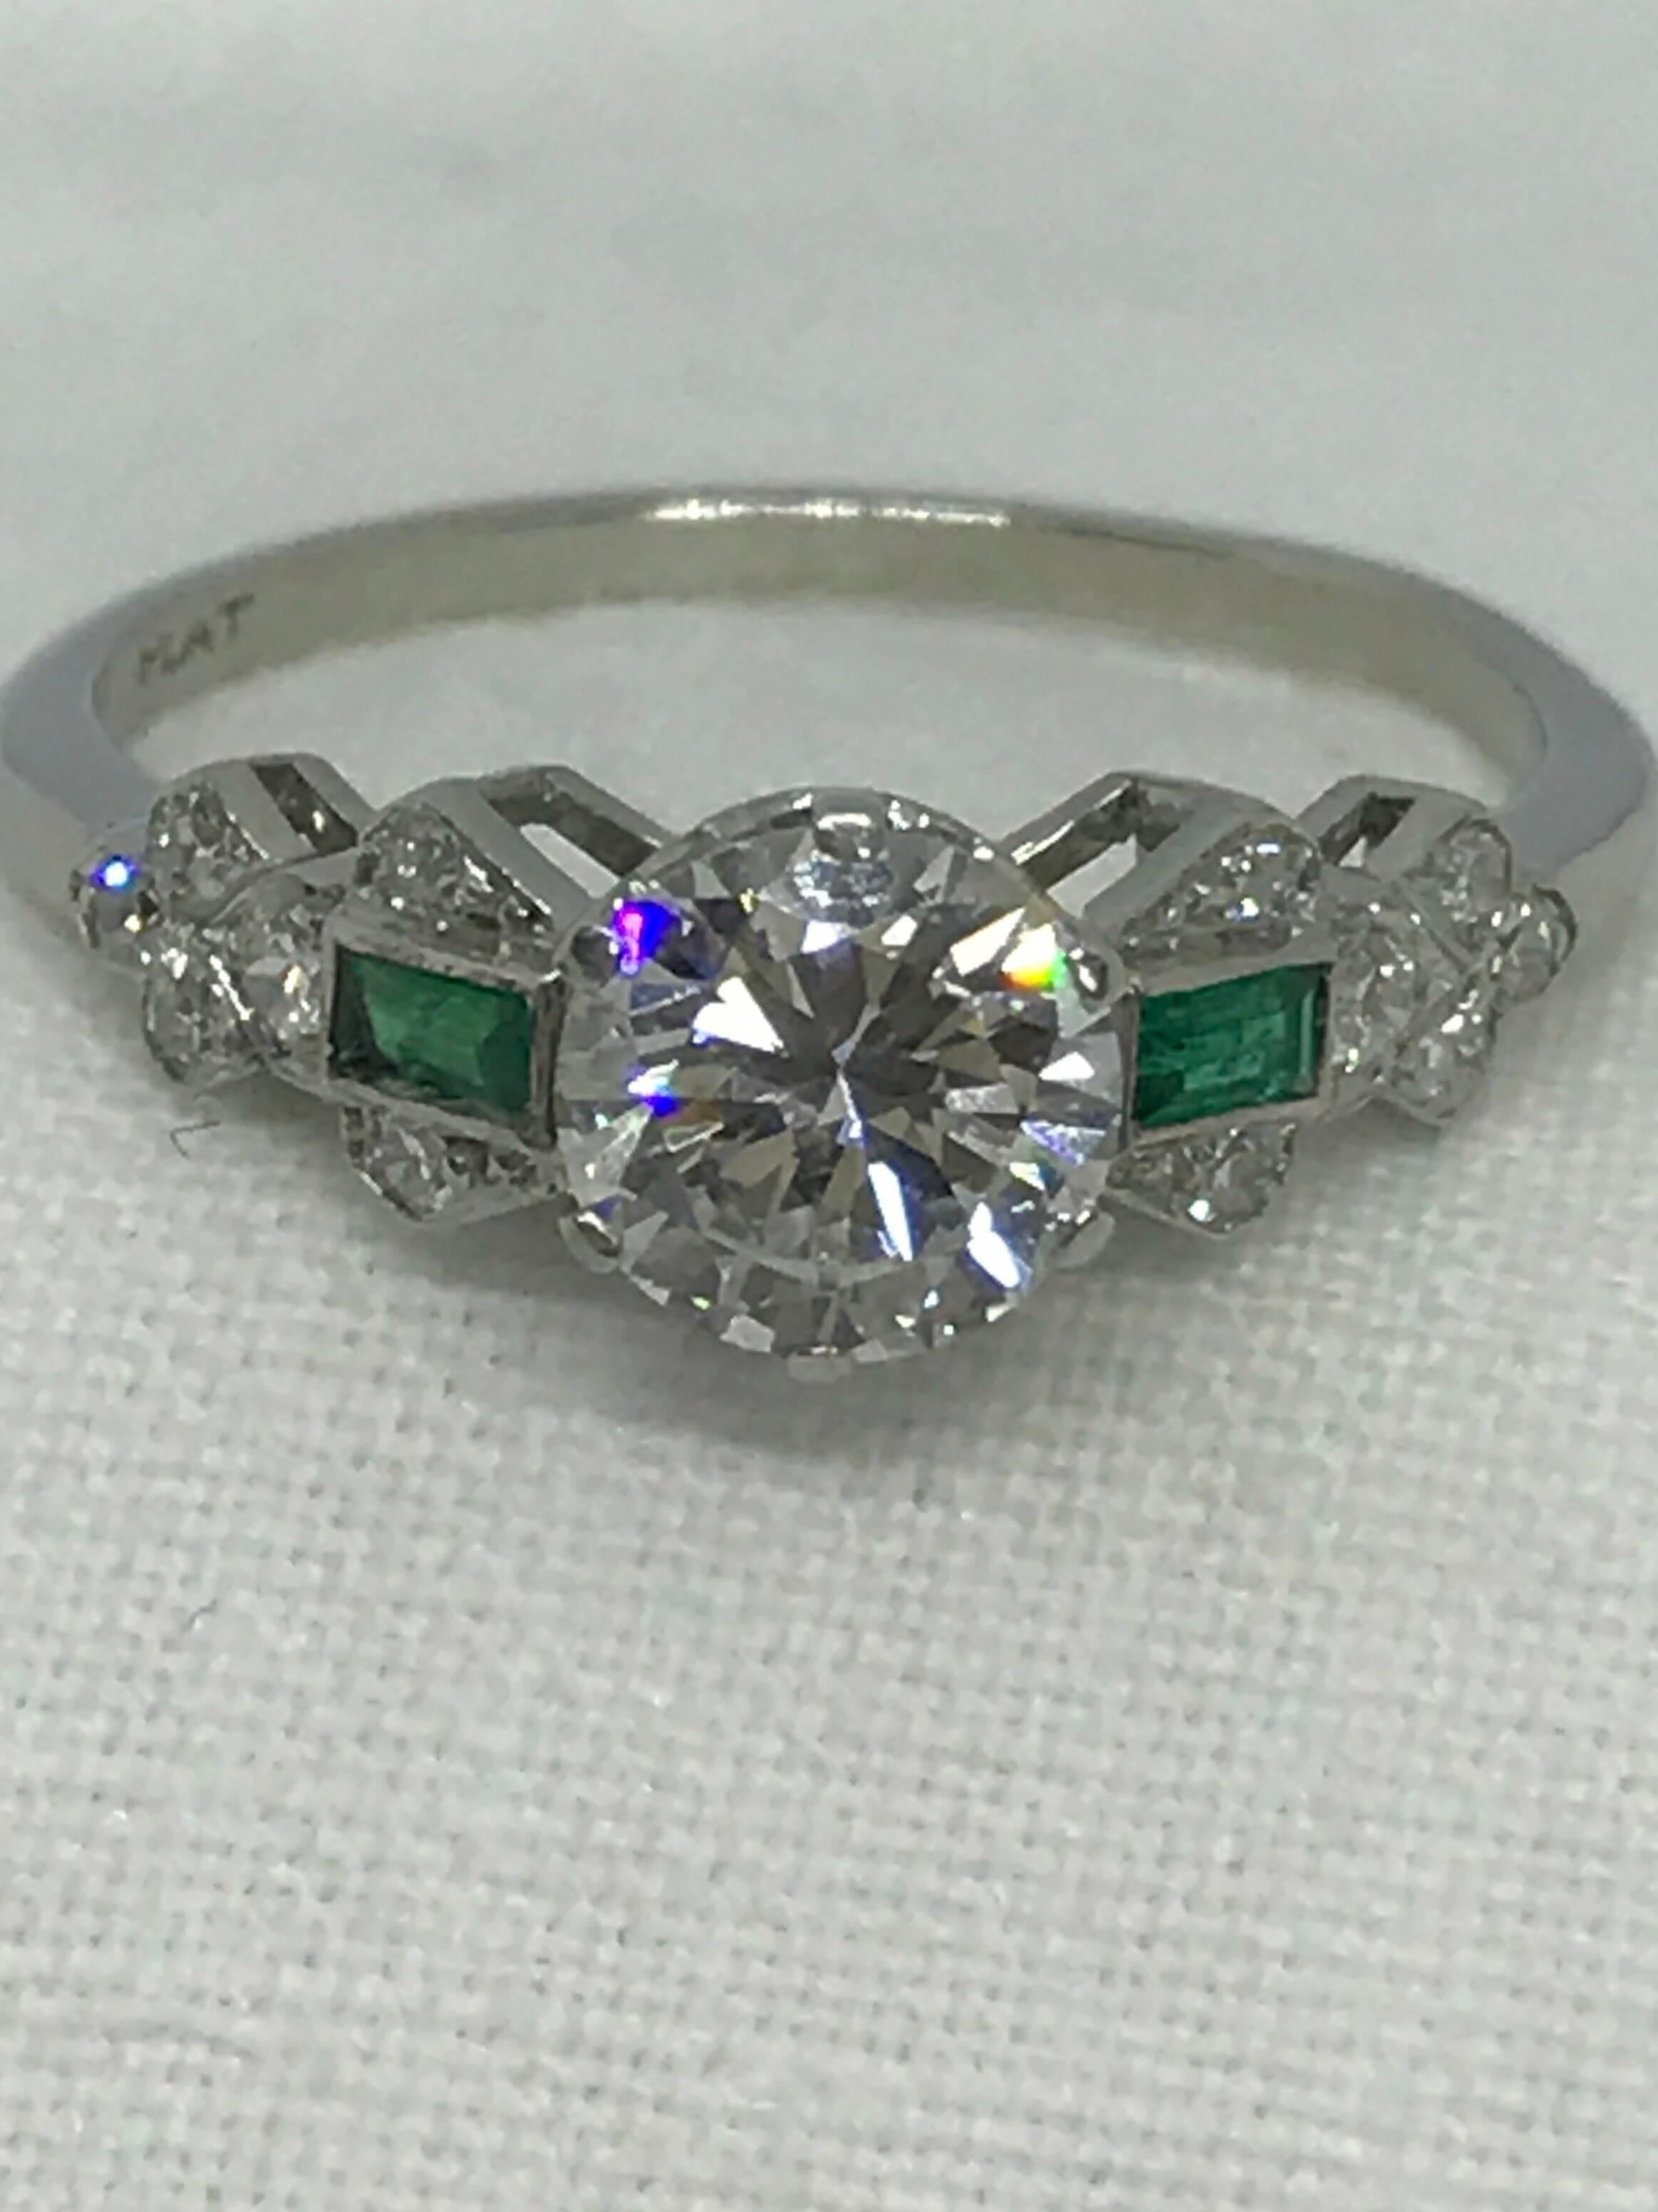 A diamond and emerald art deco ring, high art deco with geometric shoulders set with two baguette emeralds - circa 1940. The shank is marked platinum on the inside.  The diamond is VS2 and E/F colour it has great fire and sparkle.  This would make a